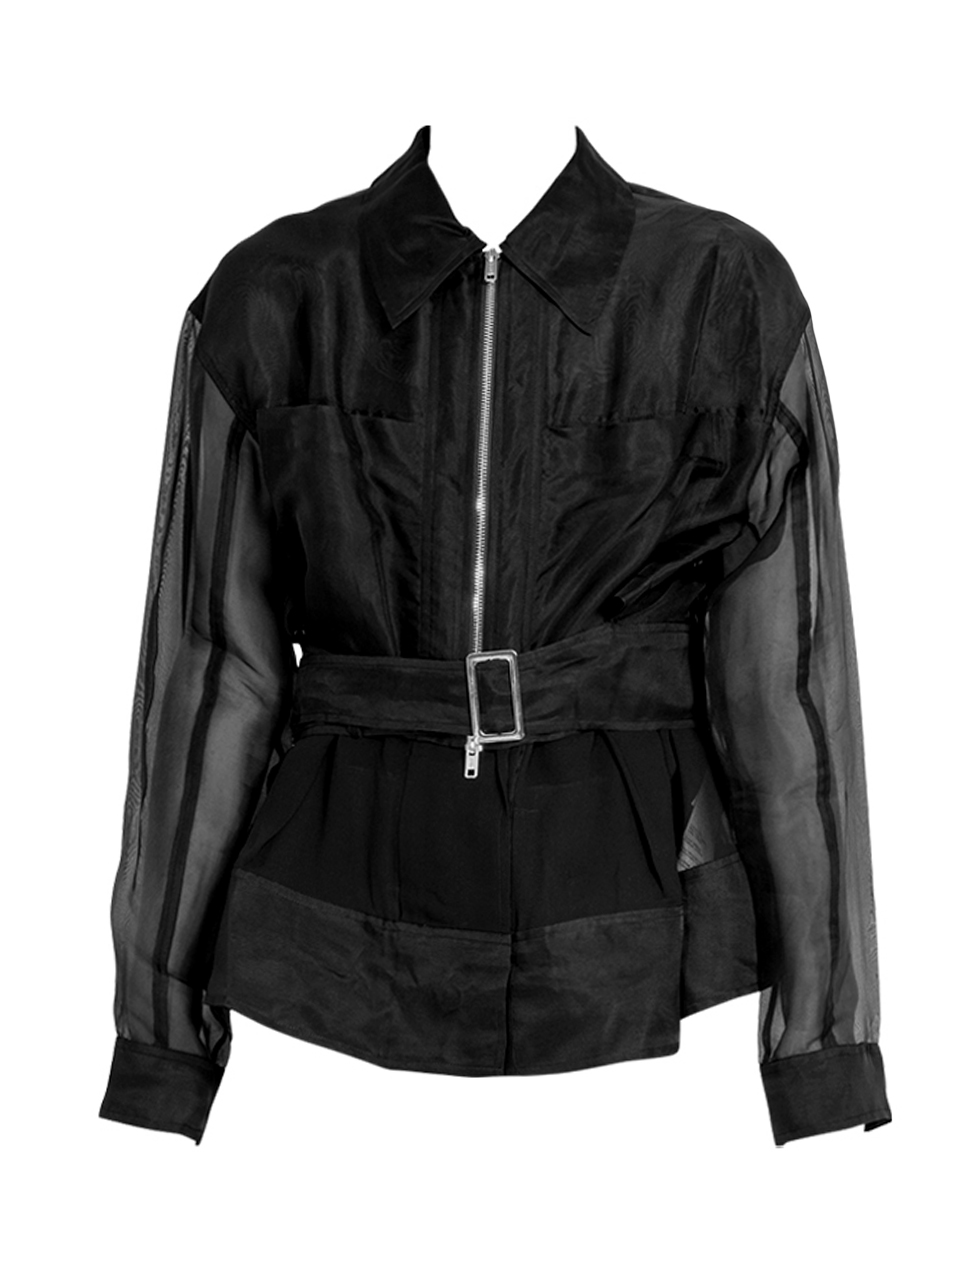 3.1 Phillip Lim Organza Belted Flounce Utility Jacket in Black Product Shot 